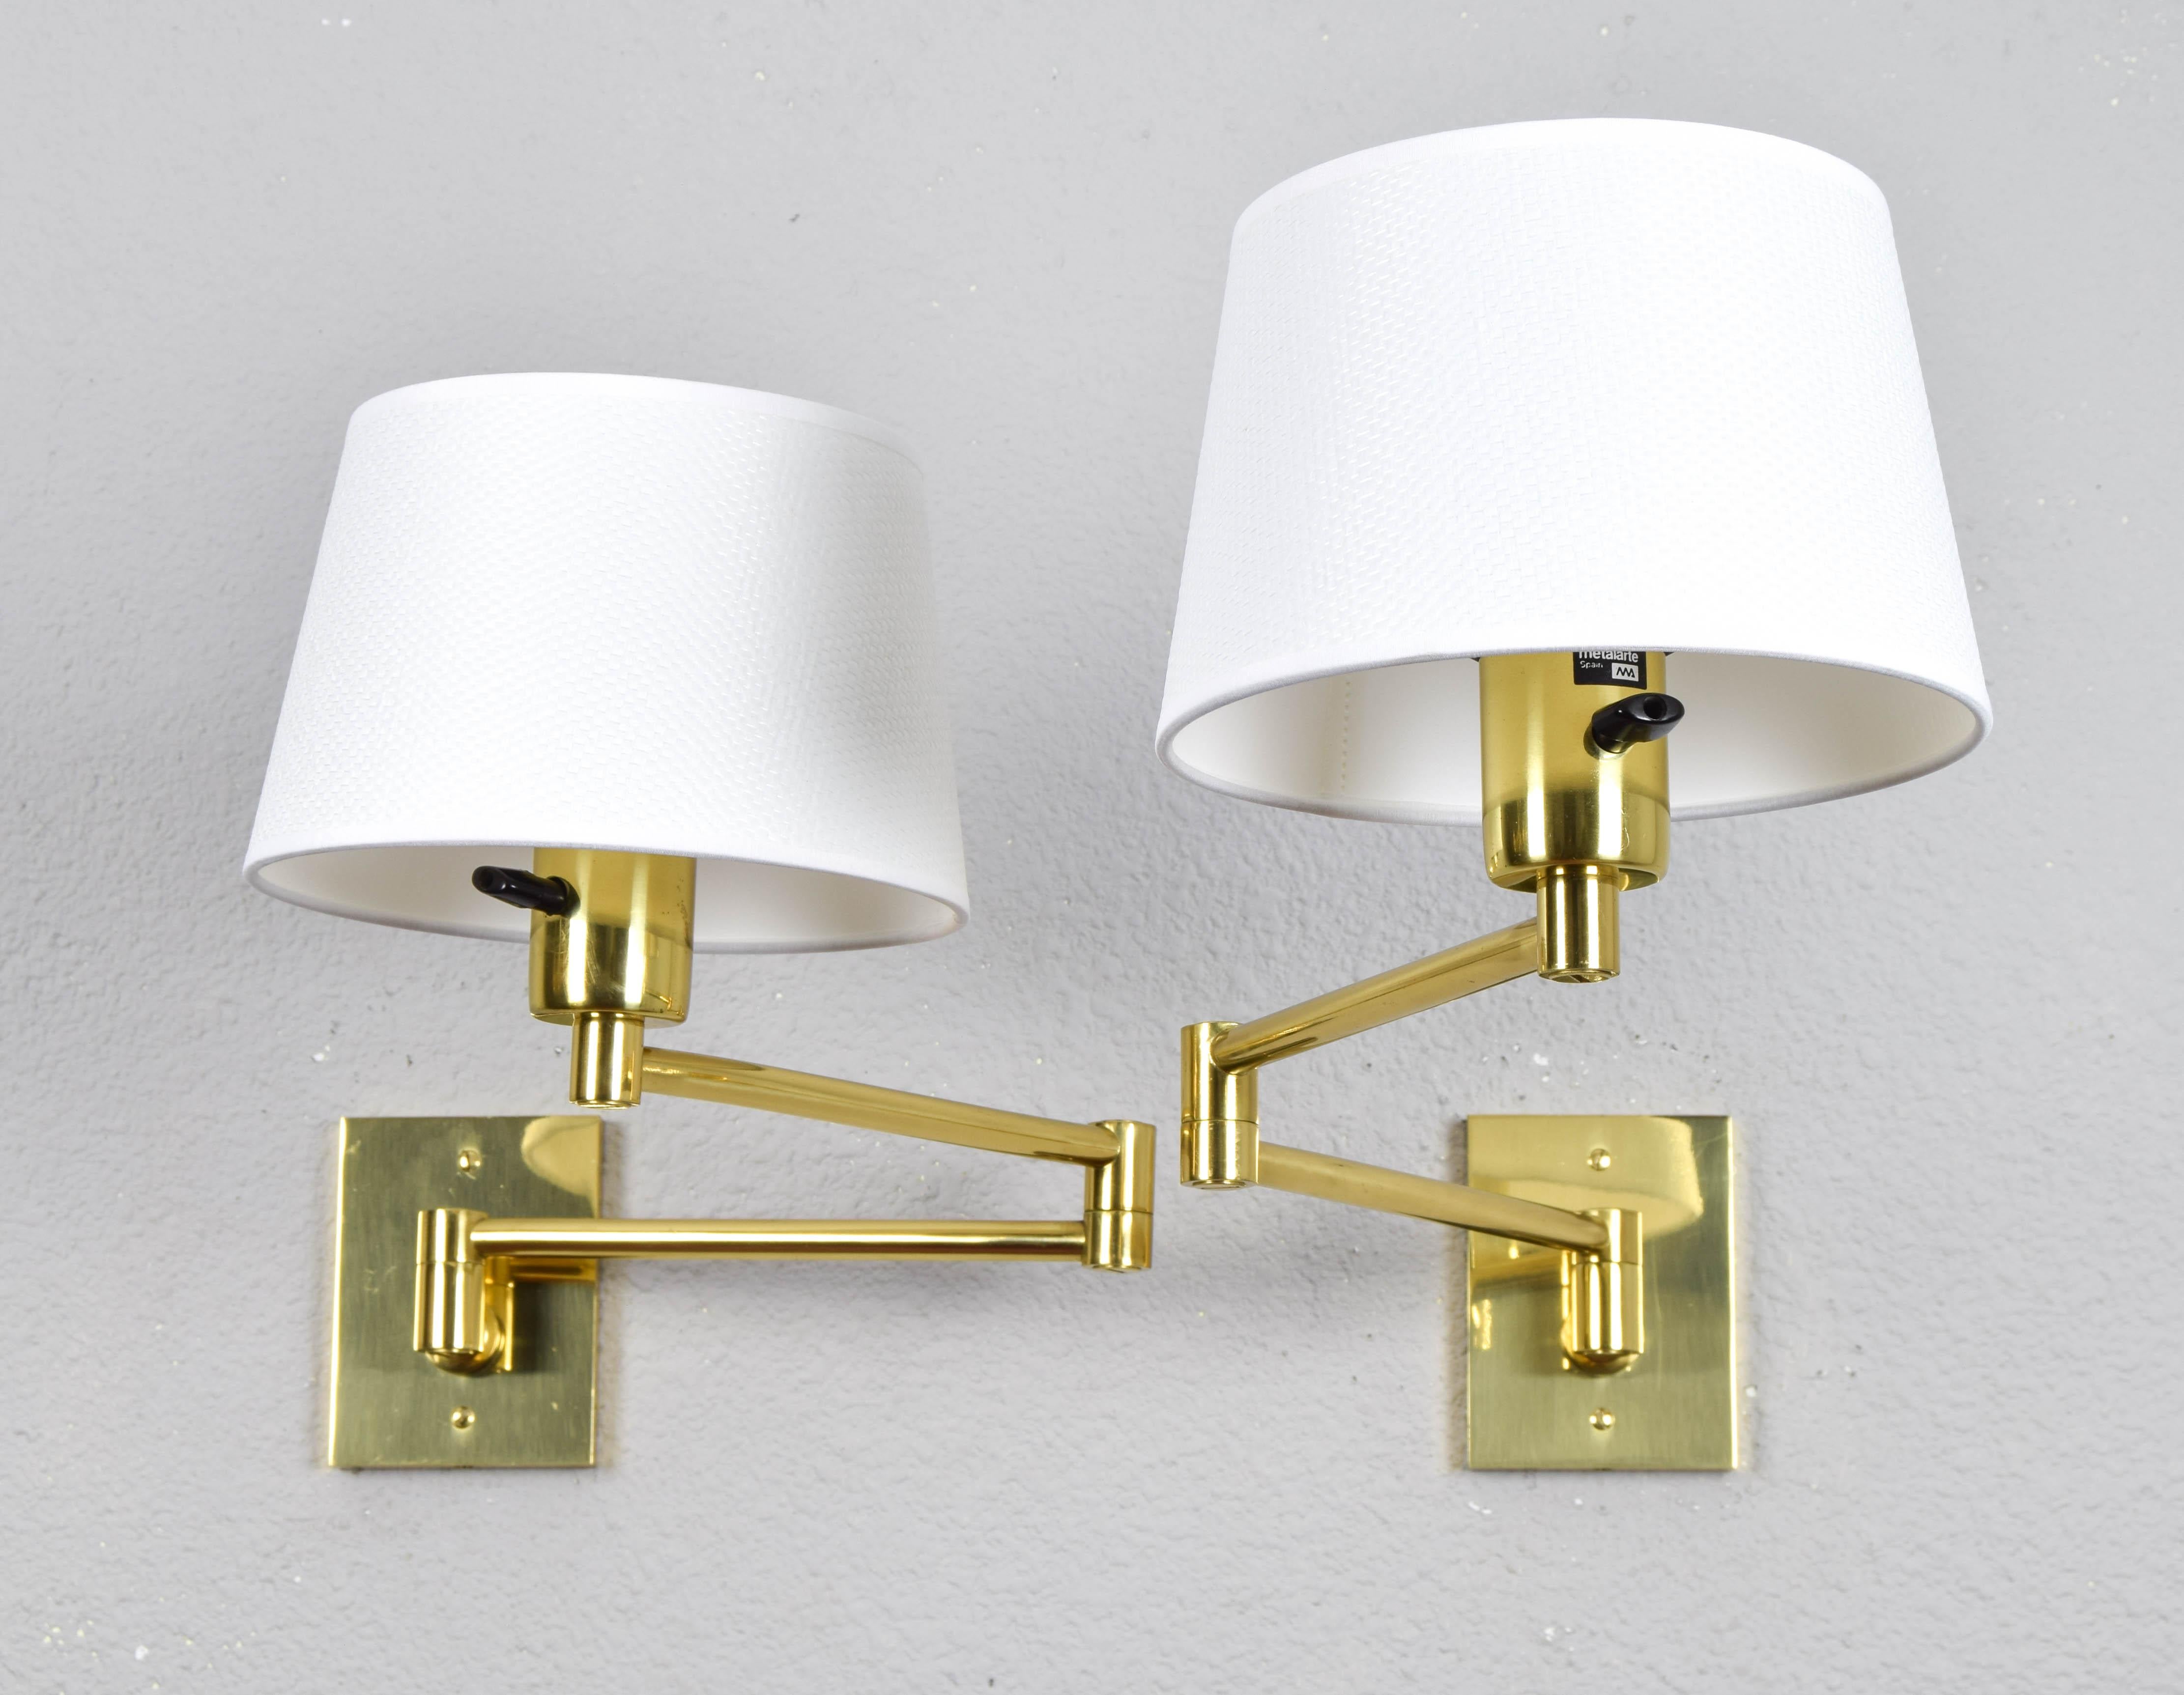  Two Mid-Century Modern Swing Arm Brass Sconces by George W Hansen for Metalarte In Good Condition In Escalona, Toledo